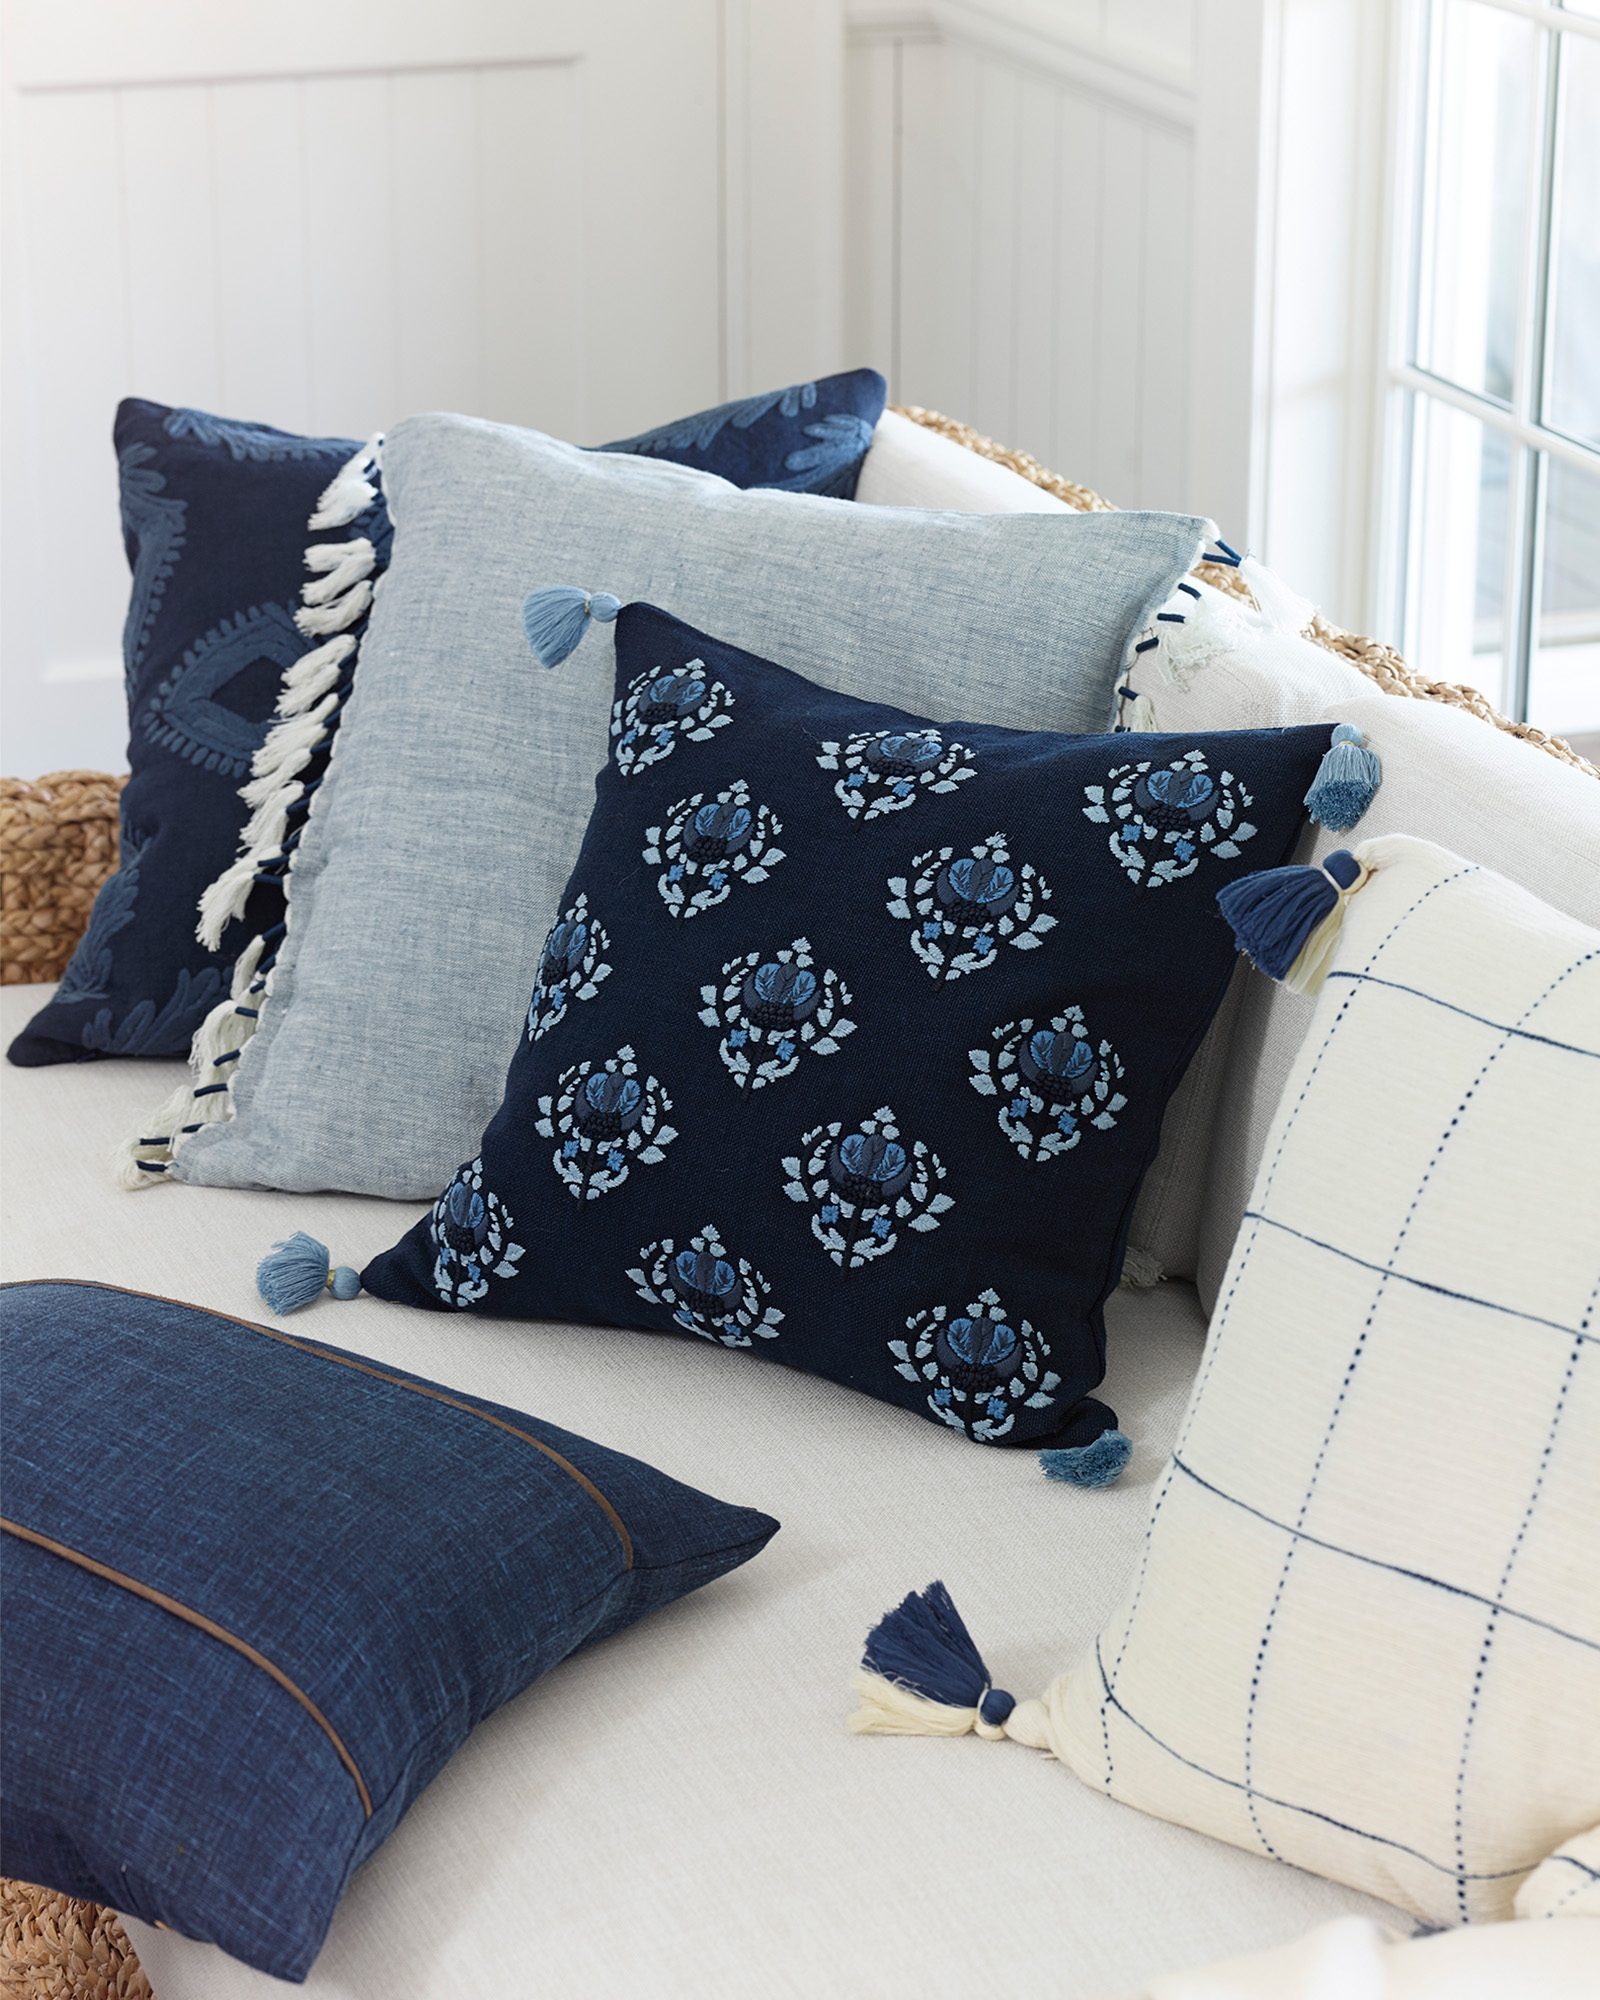 Kemp 20" SQ Pillow Cover - Navy - Insert sold separately - Image 3